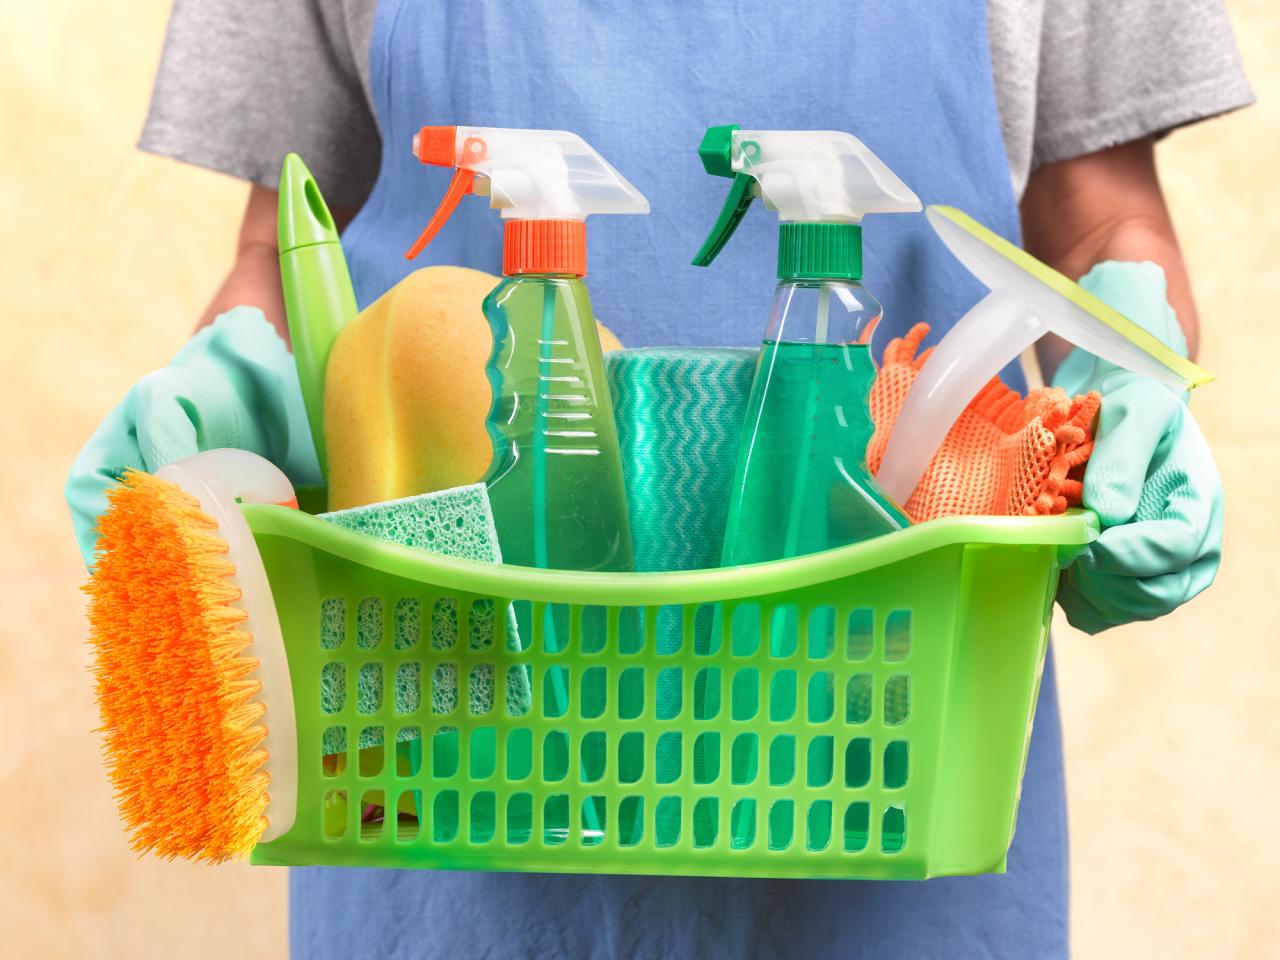 Are Natural Disinfectants Effective? How to Know If a Cleaner